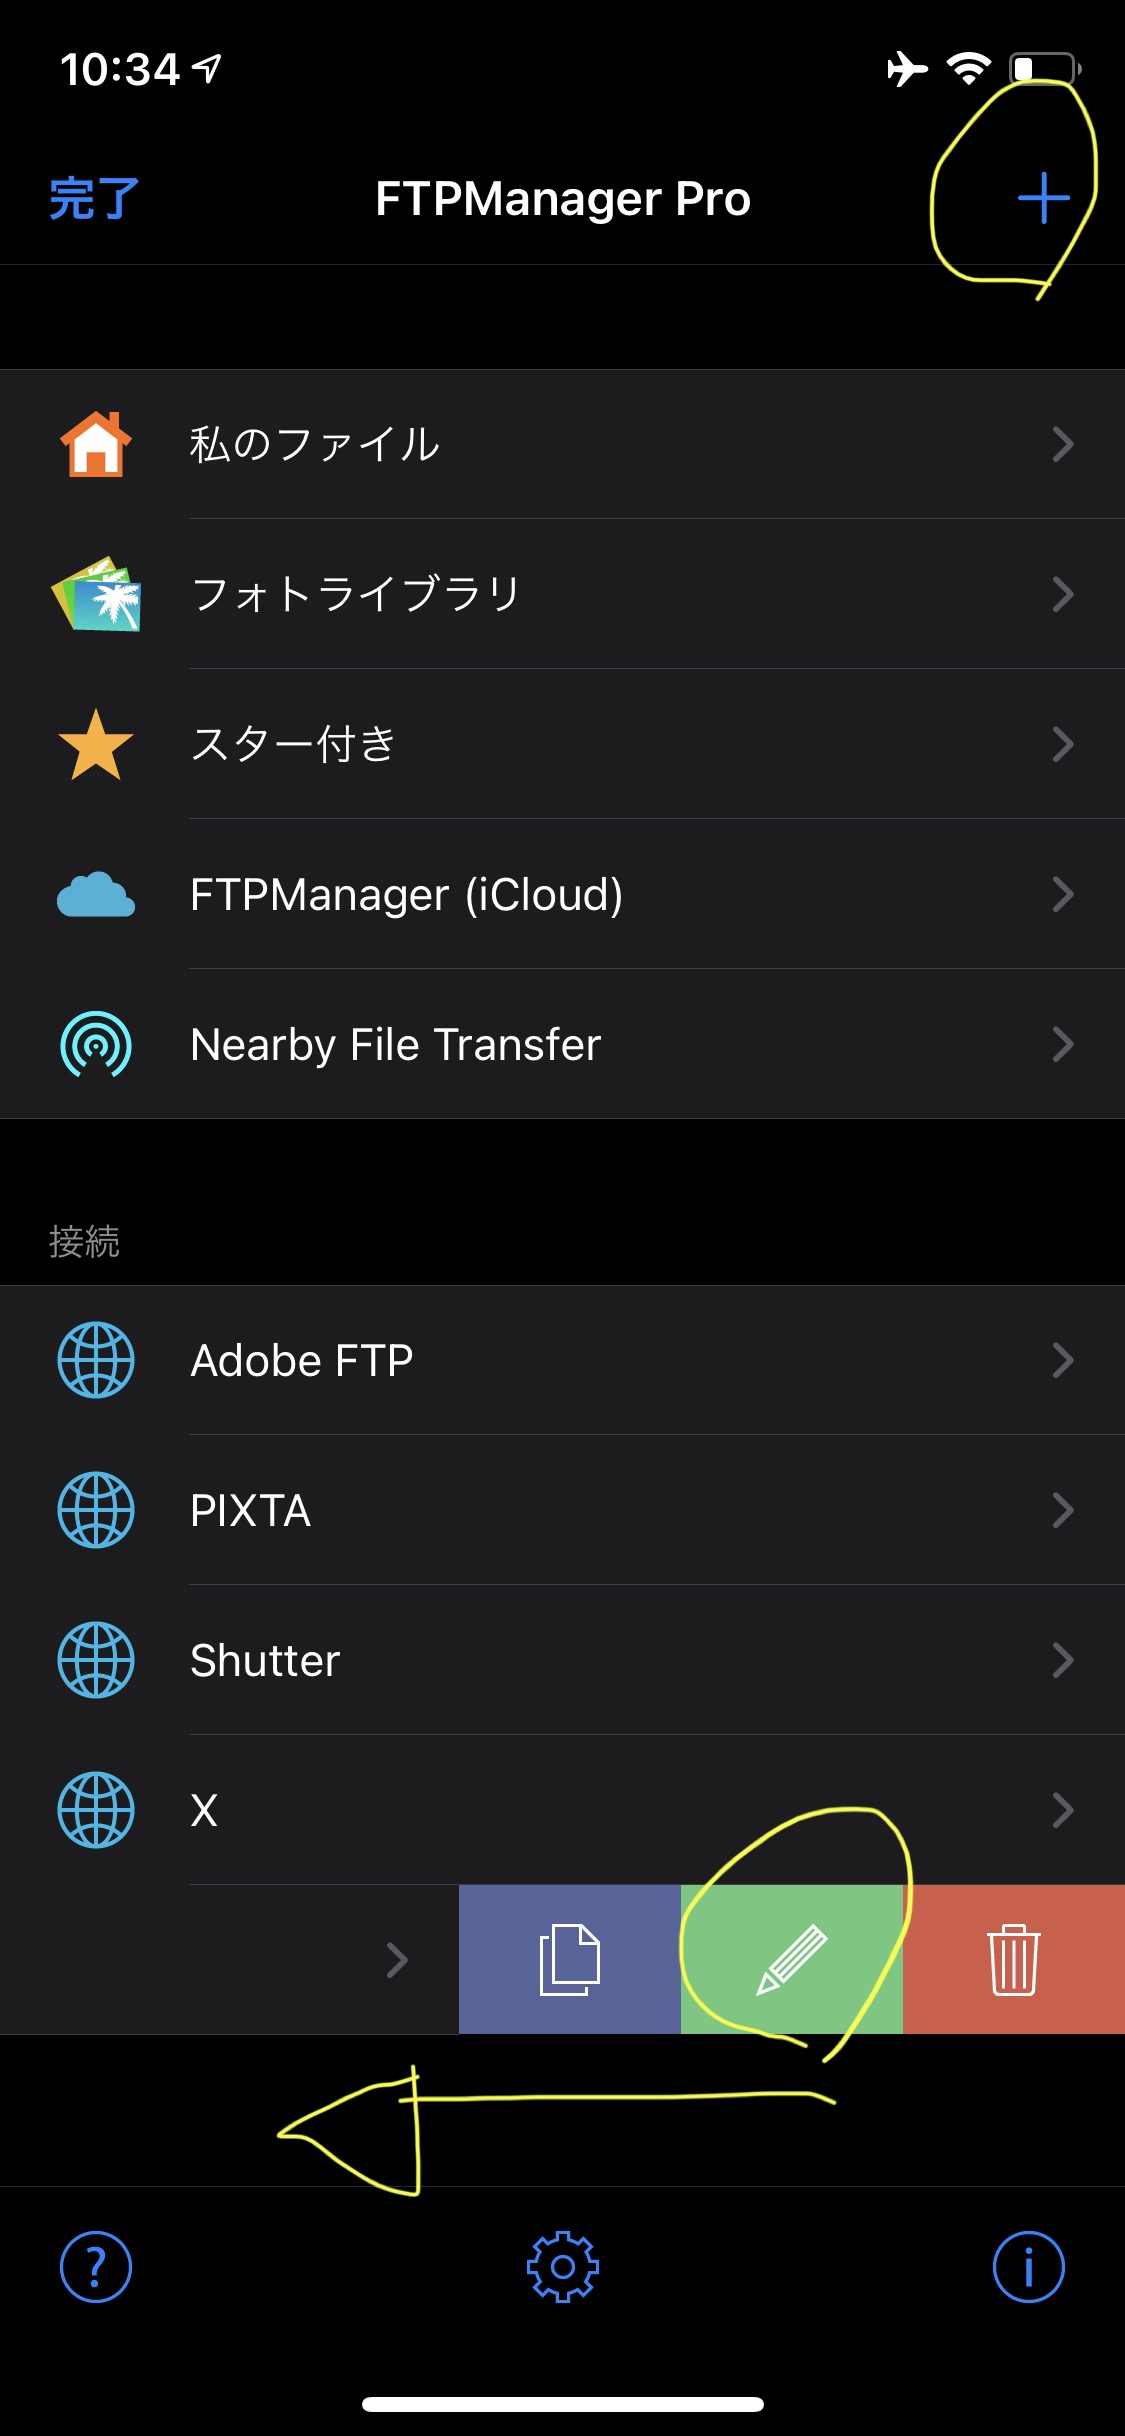 How to change setting of FTP to SFTP on Adobe Stock Contributor with iOS App FTP Manager Pro